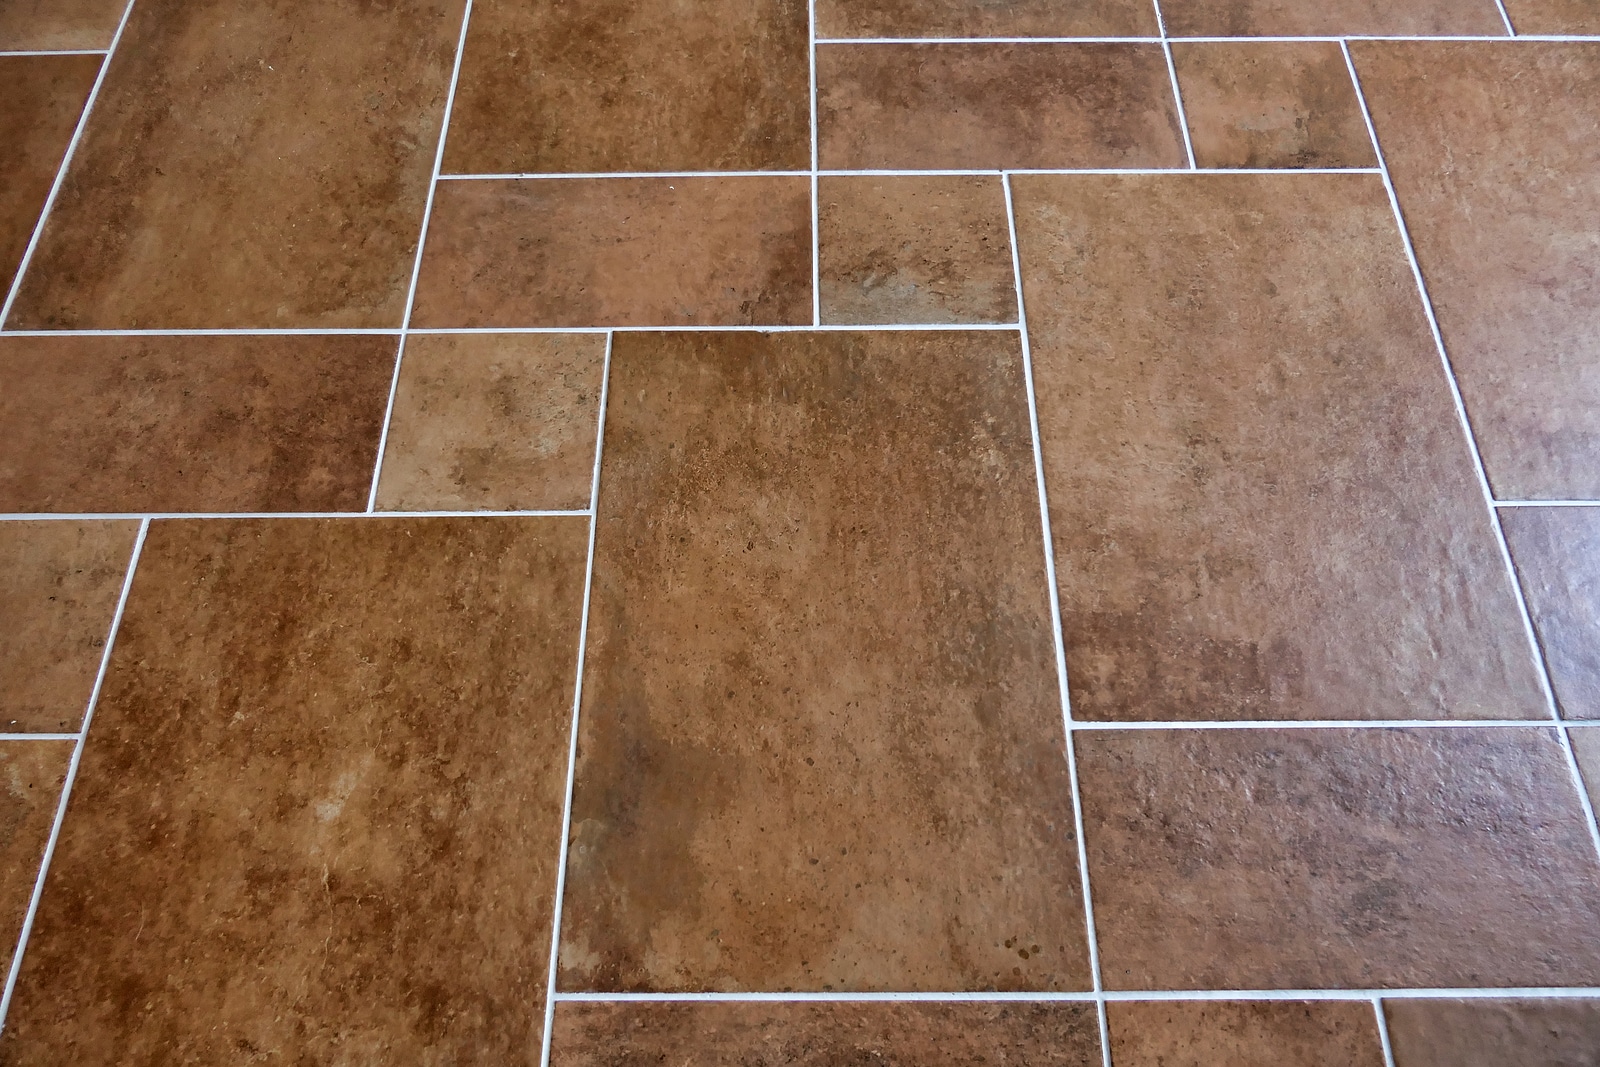 residential tile and grout services in norfolk va